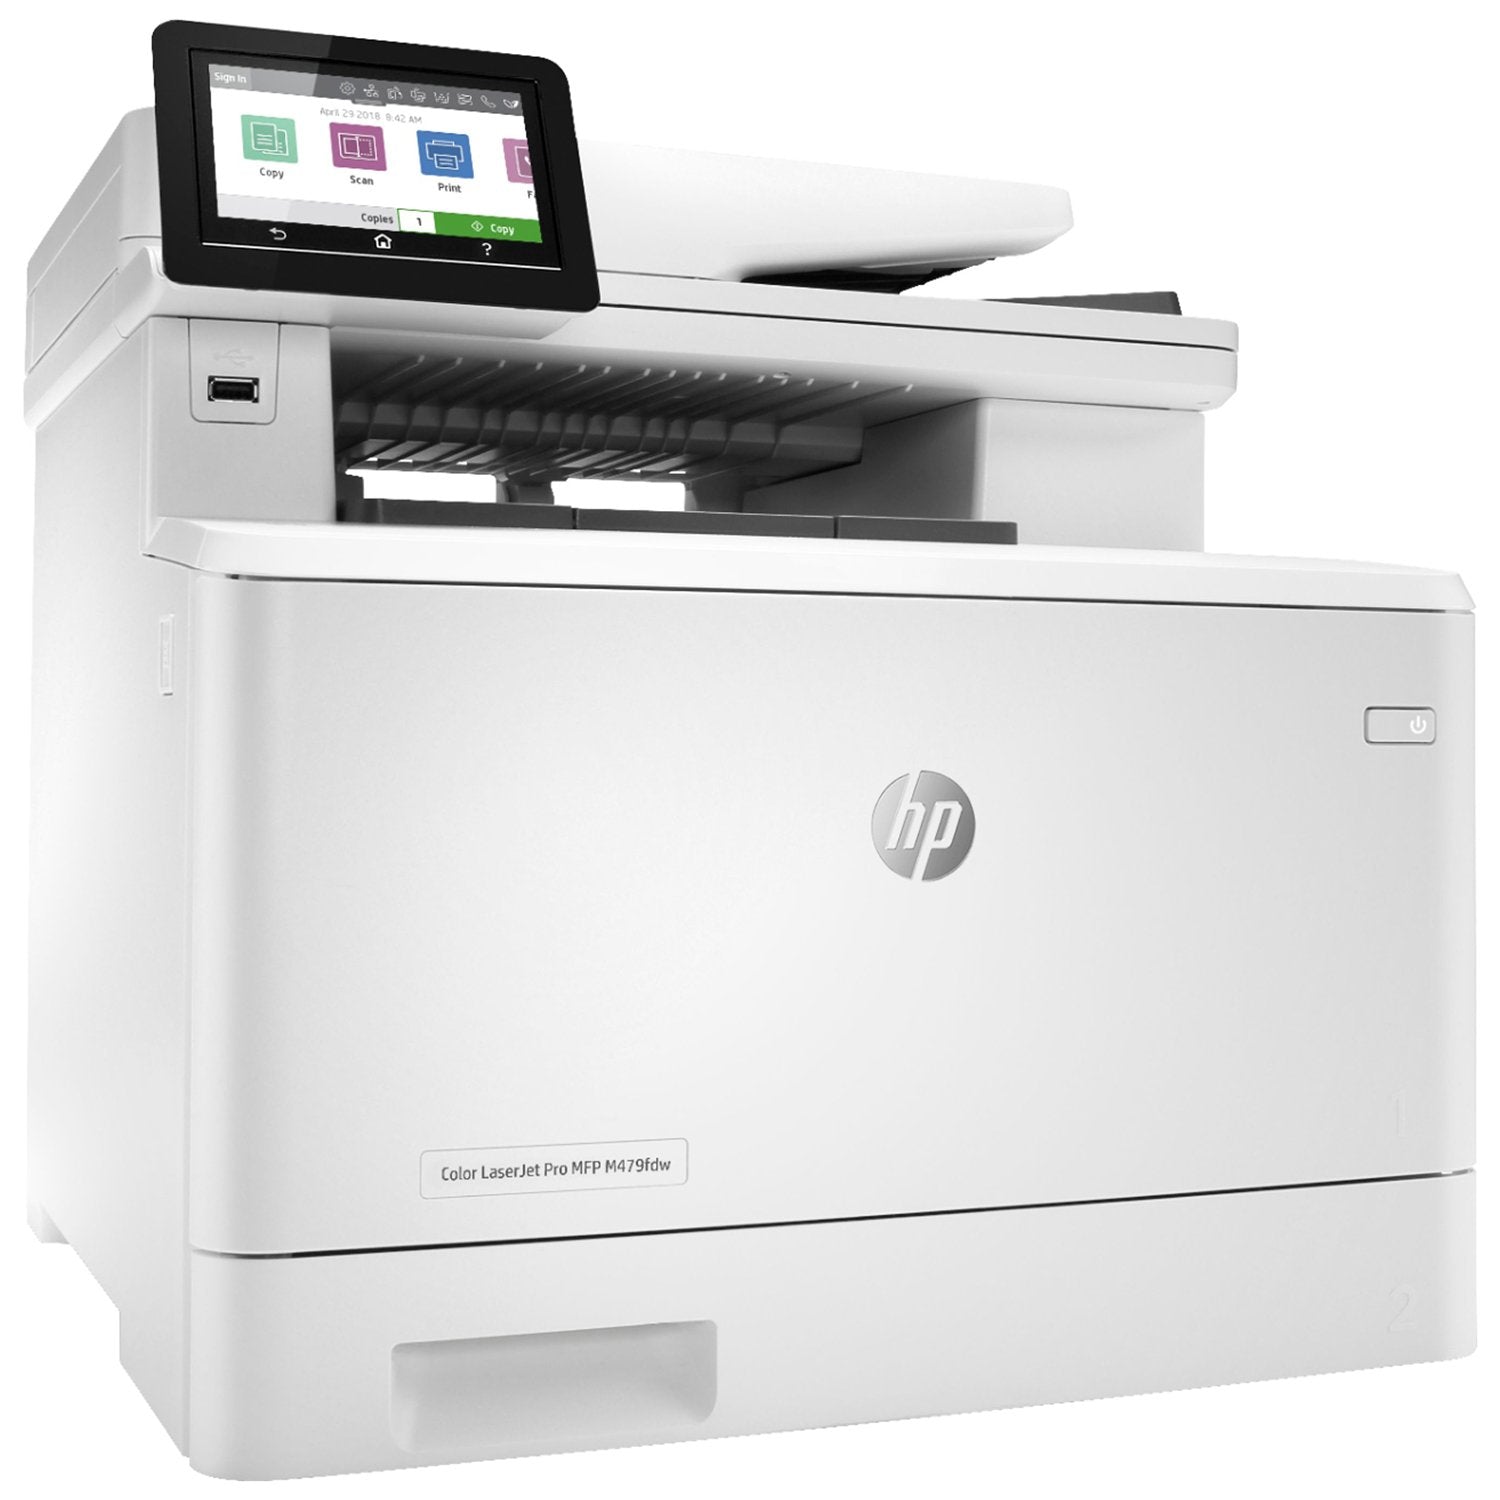 Absolute Toner HP LaserJet Pro MFP M479dw Color Laser Multifunction Printer with WI-FI and Duplex printing (Uses a Very Large Toners) Laser Printer